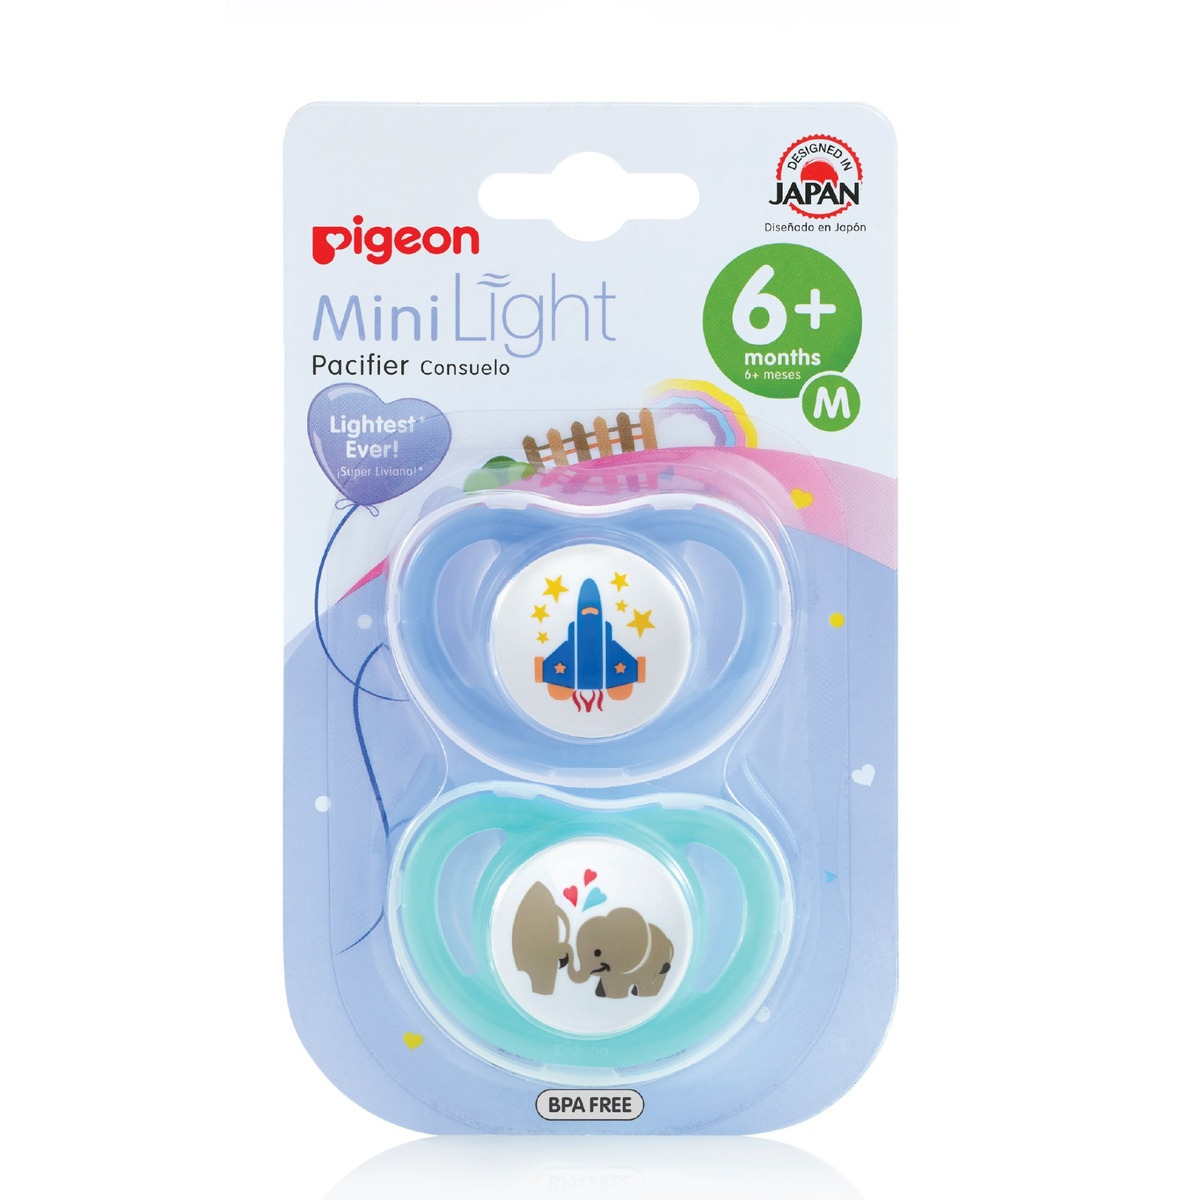 Pigeon Minilight Pacifier 2 Pack